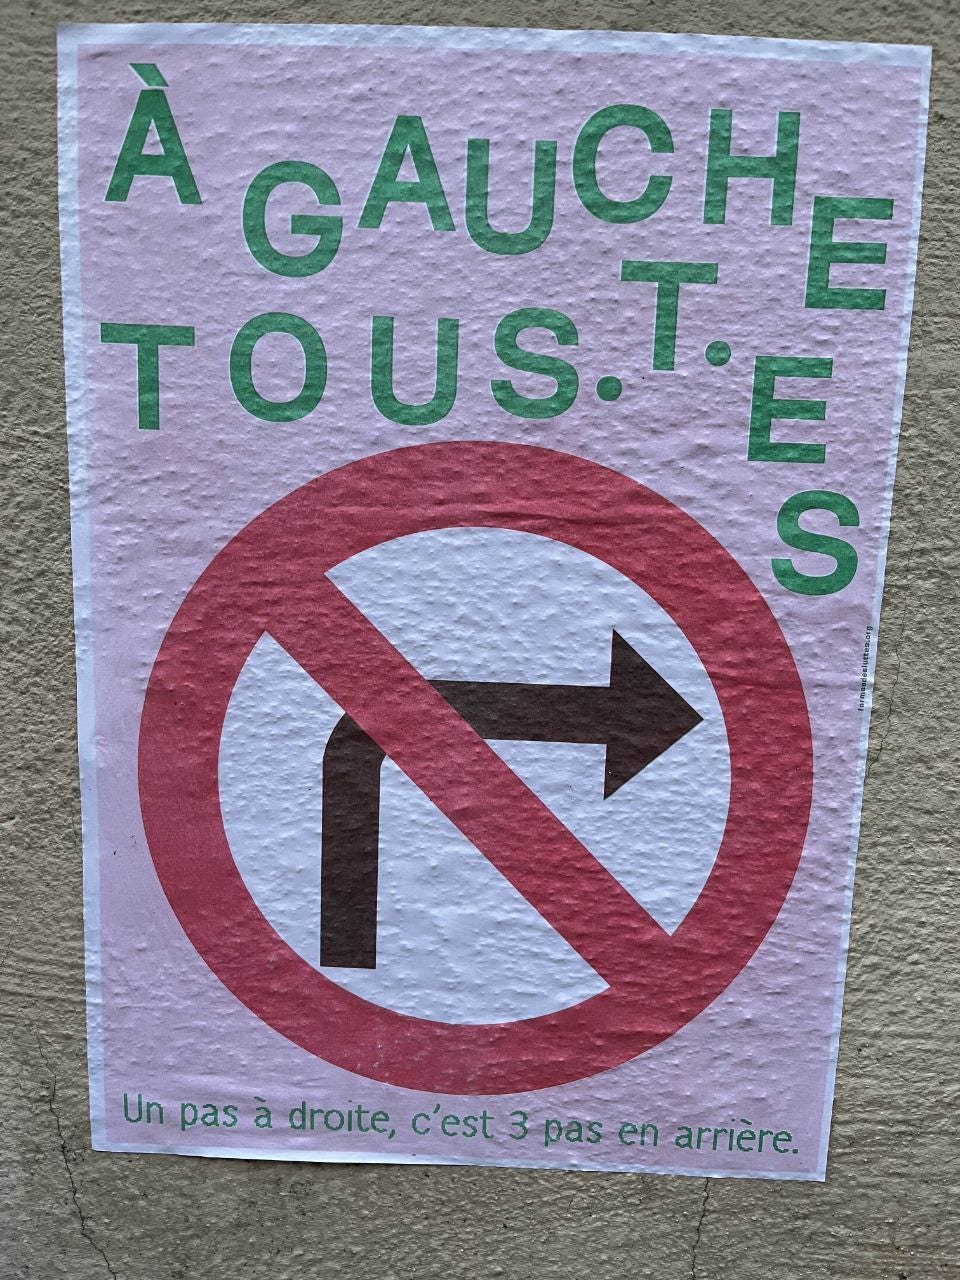 a French political poster reading (translated), “Left Turn Only. Right turns take us three steps back.”